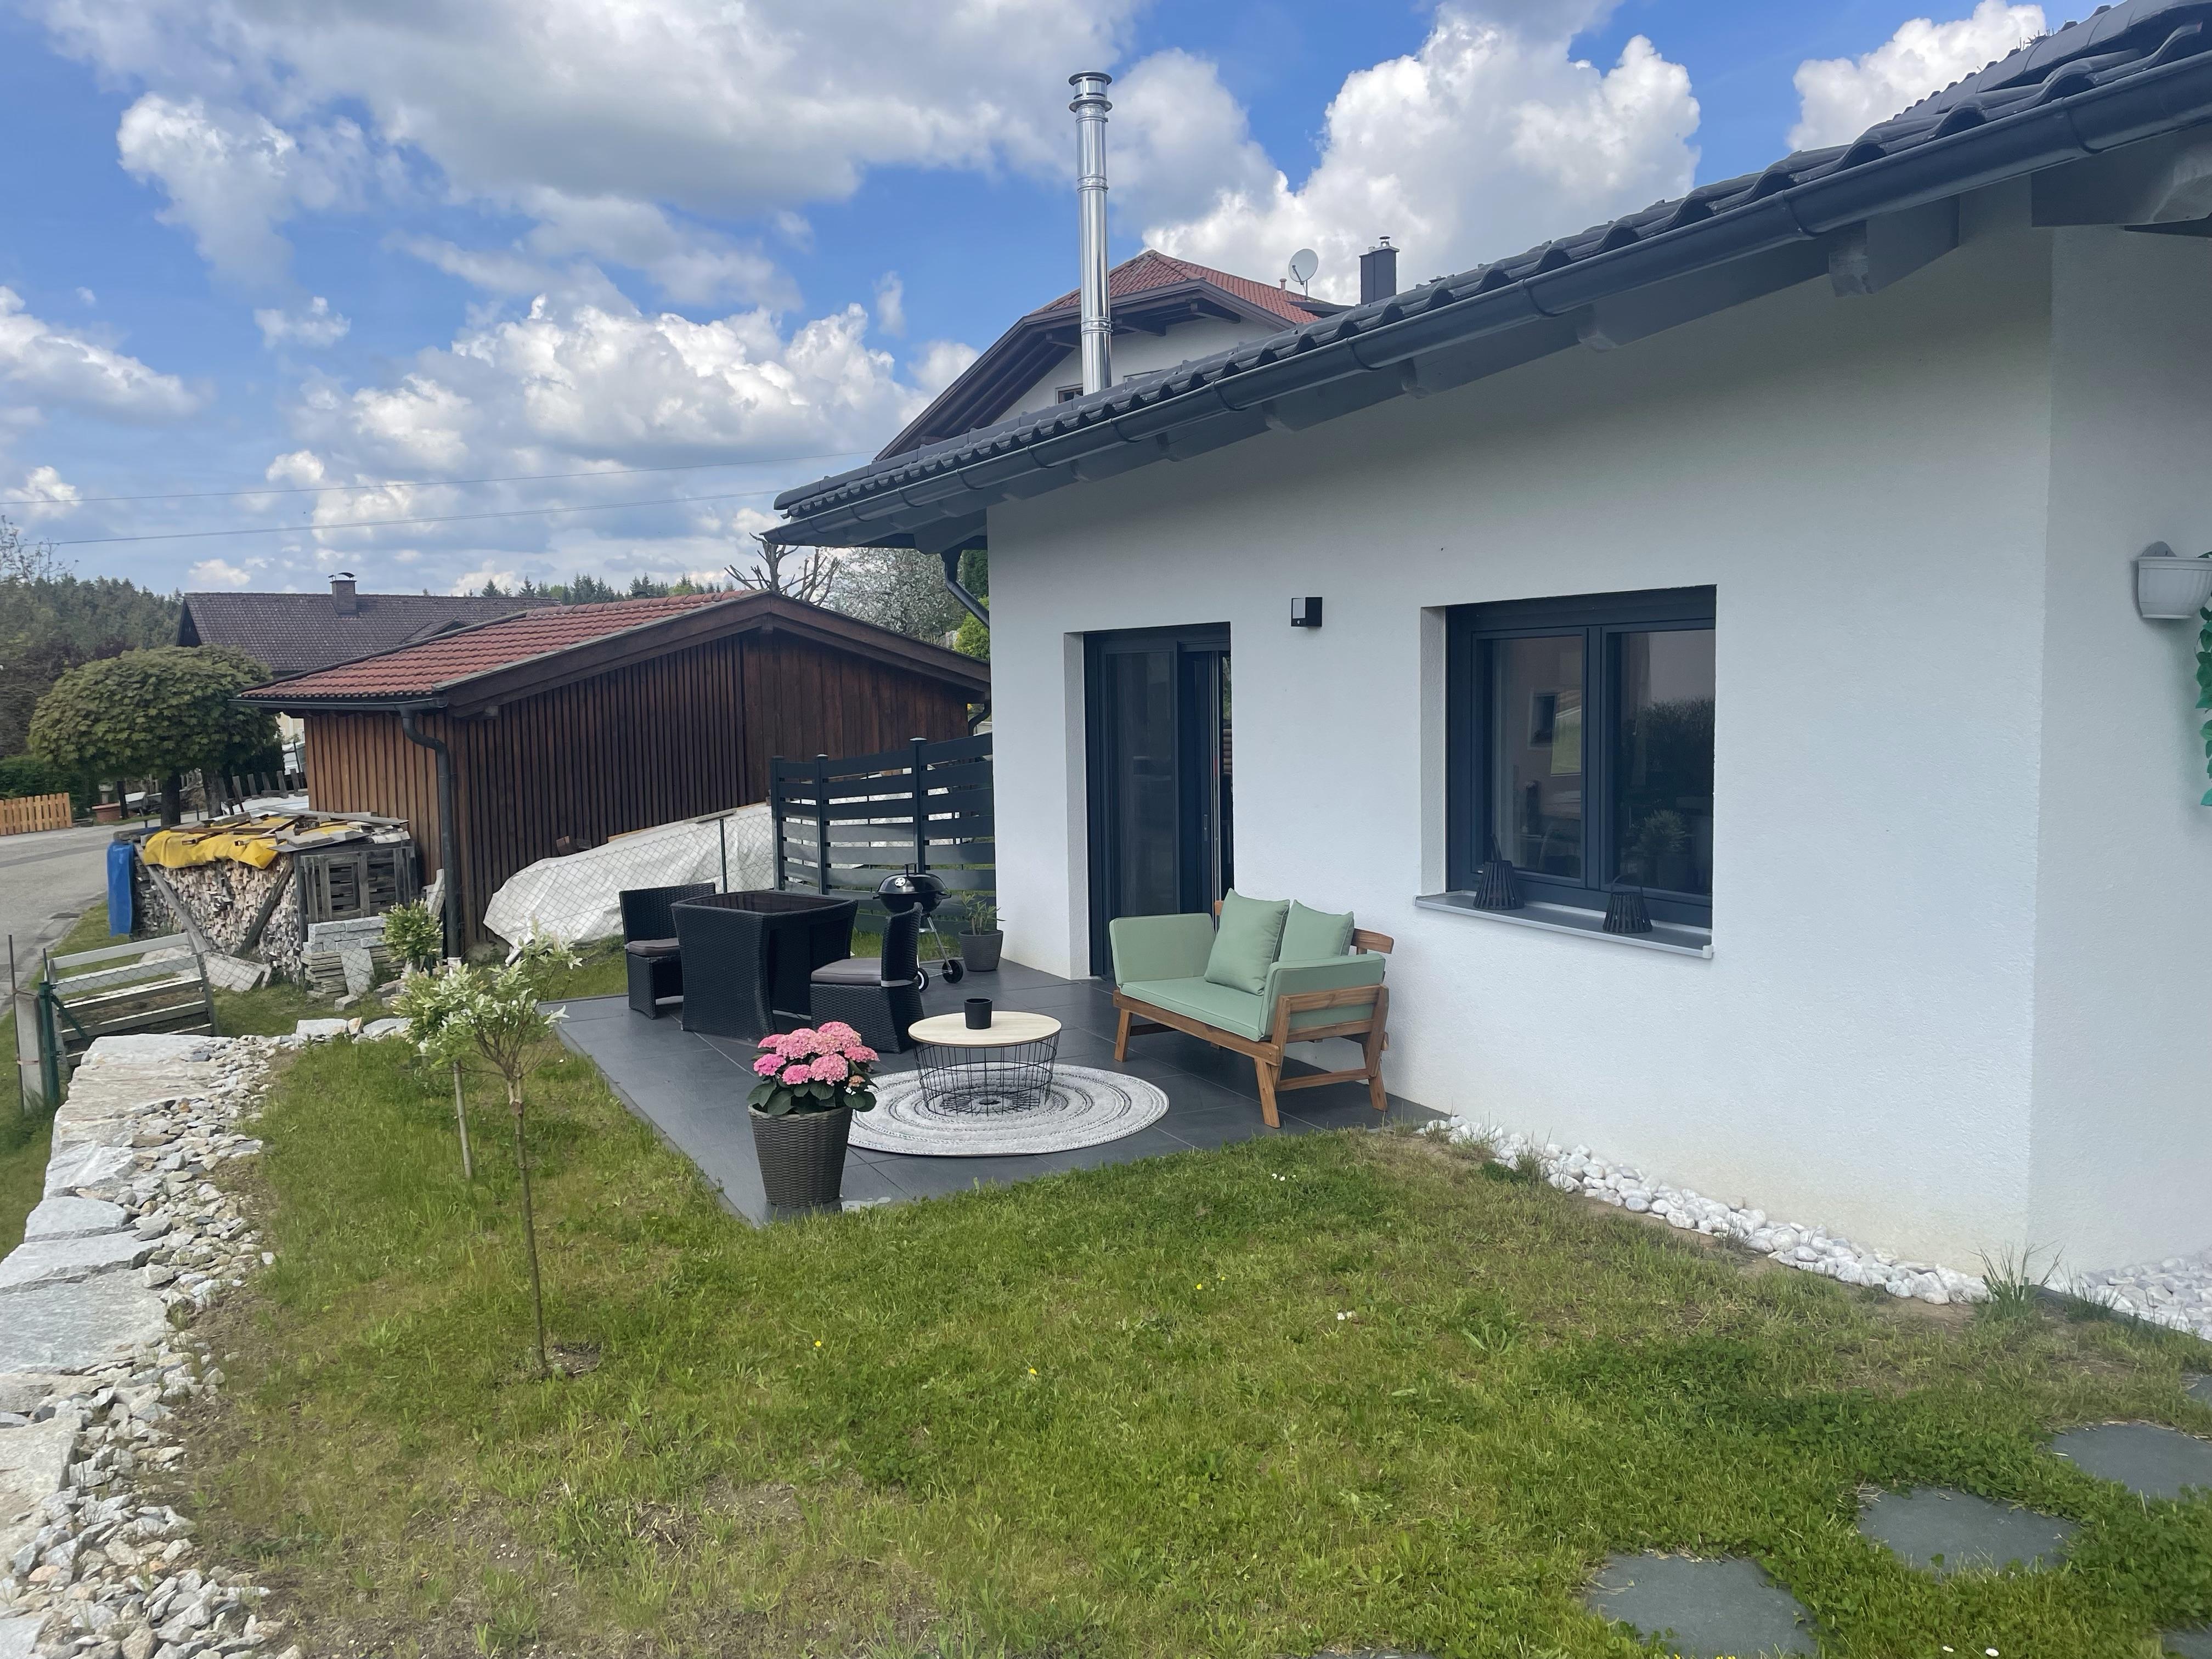 Holiday Apartment For 4 - Passau